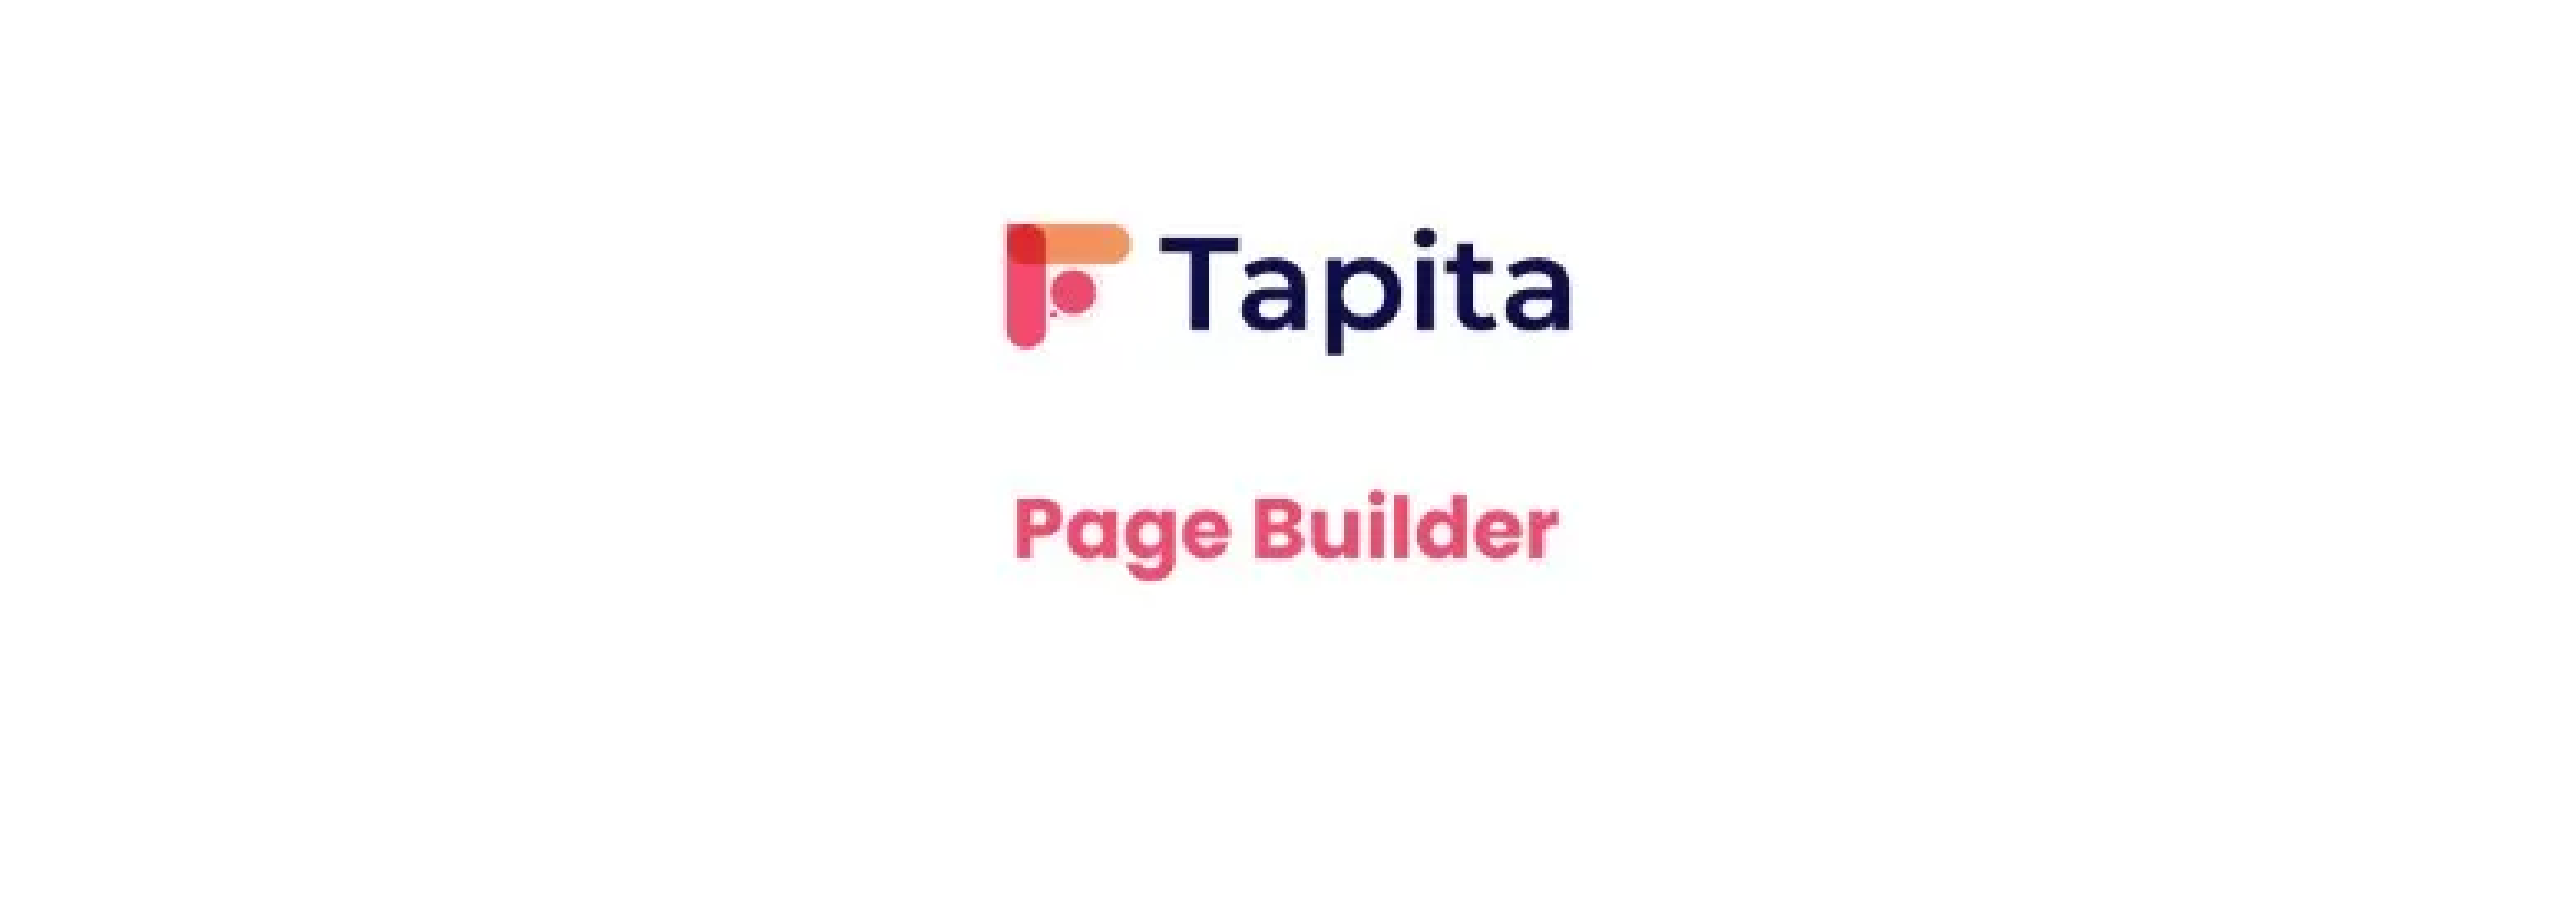 Tapita Page Builder Extension for Magento Online Stores